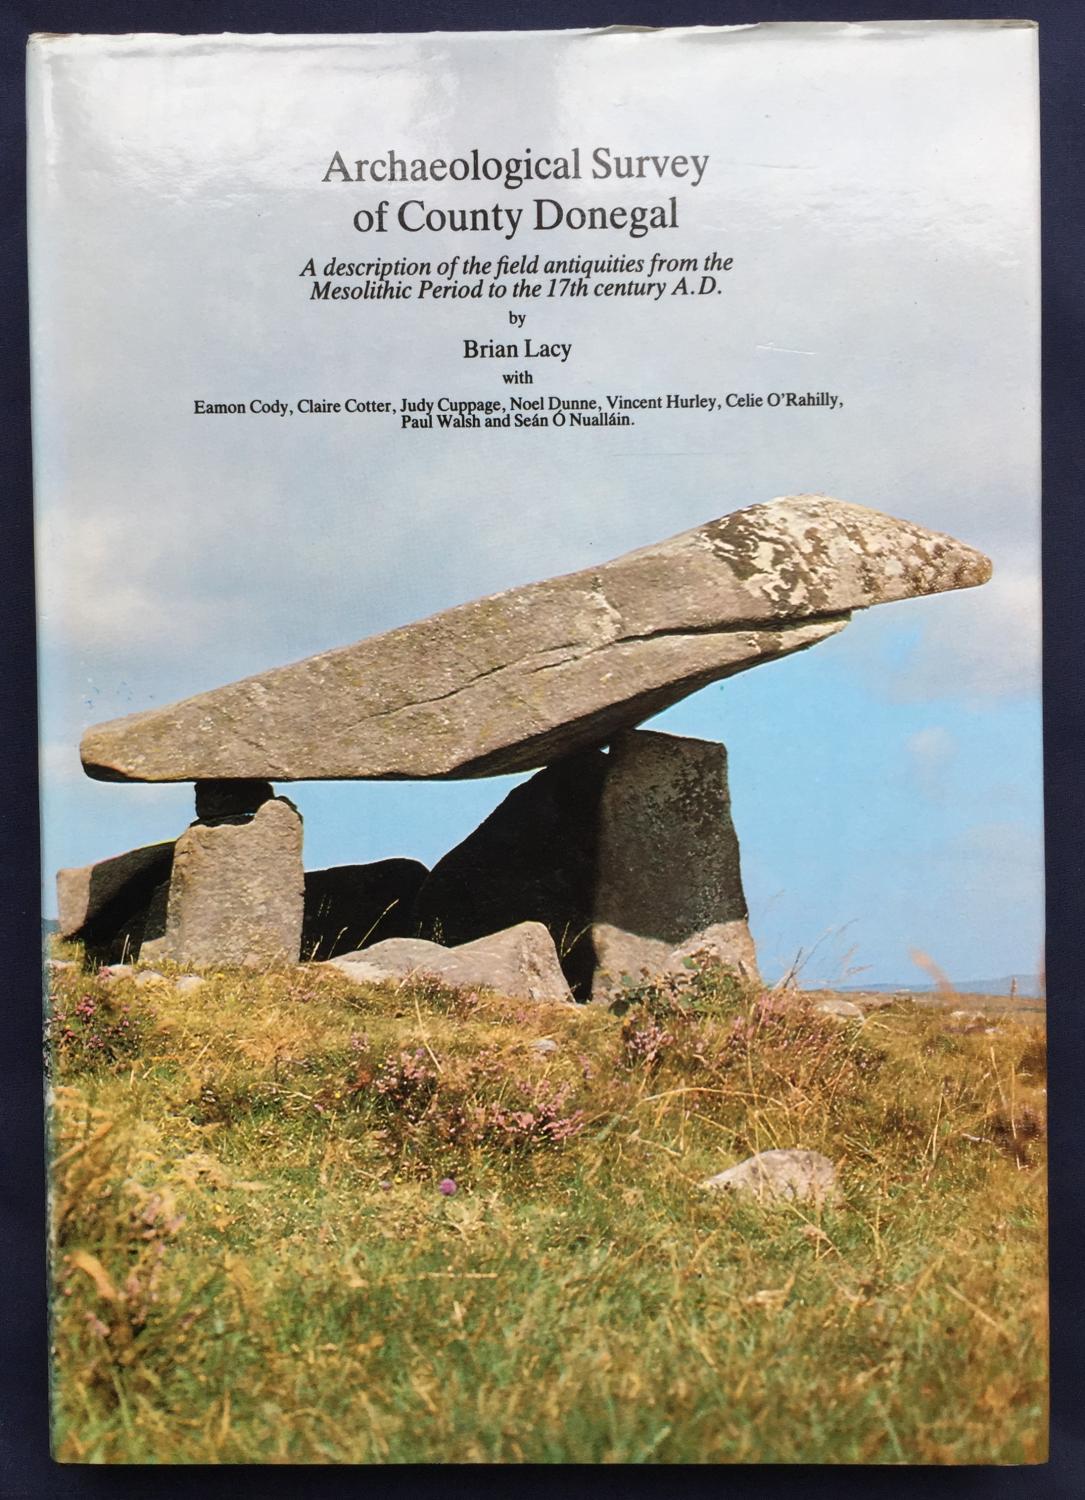 Archaeological Survey of County Donegal - A Description of the Field Antiquities of the County from the Mesolithic Period to the 17th Century A. D. - Lacy, Brian - with Eamon Cody, Claire Cotter, Judy Cuppage, Noel Dunne, Vincent Hurley, Celie O'Rahilly, Paul Walsh and Seán Ó Nualláin